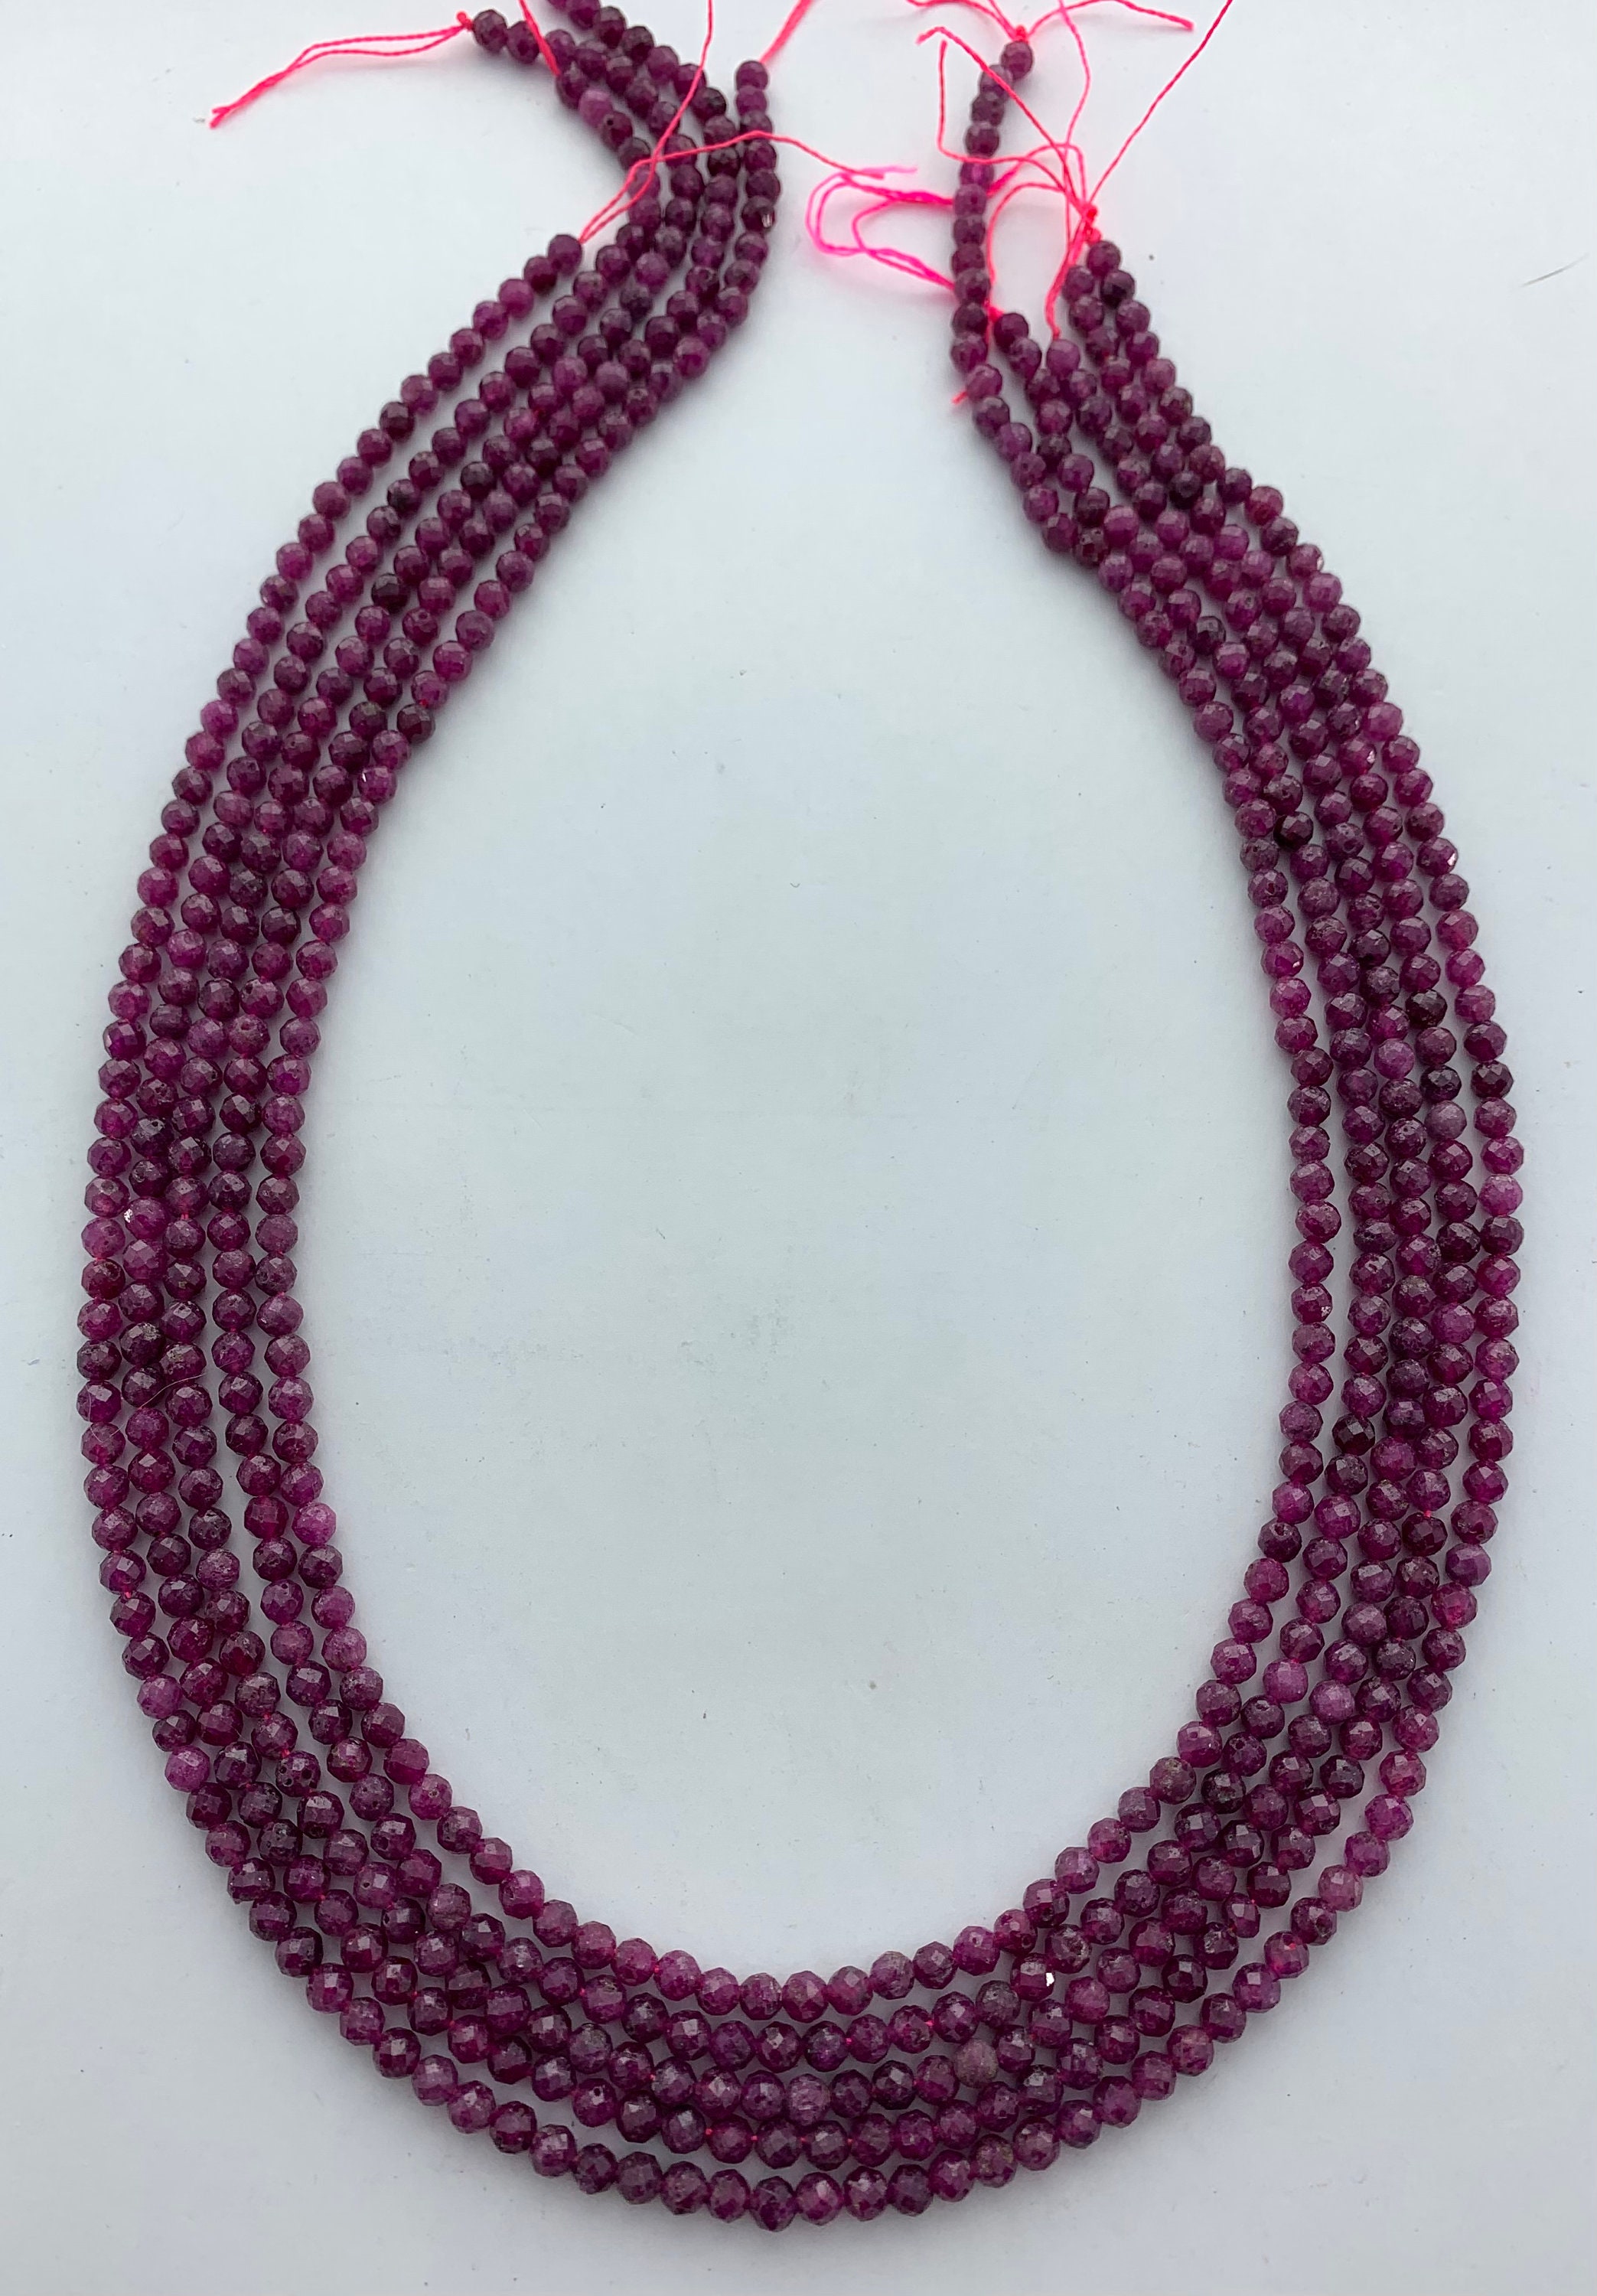 3mm Round Faceted Ruby Gemstone Beads. Full 15 Strand - Etsy